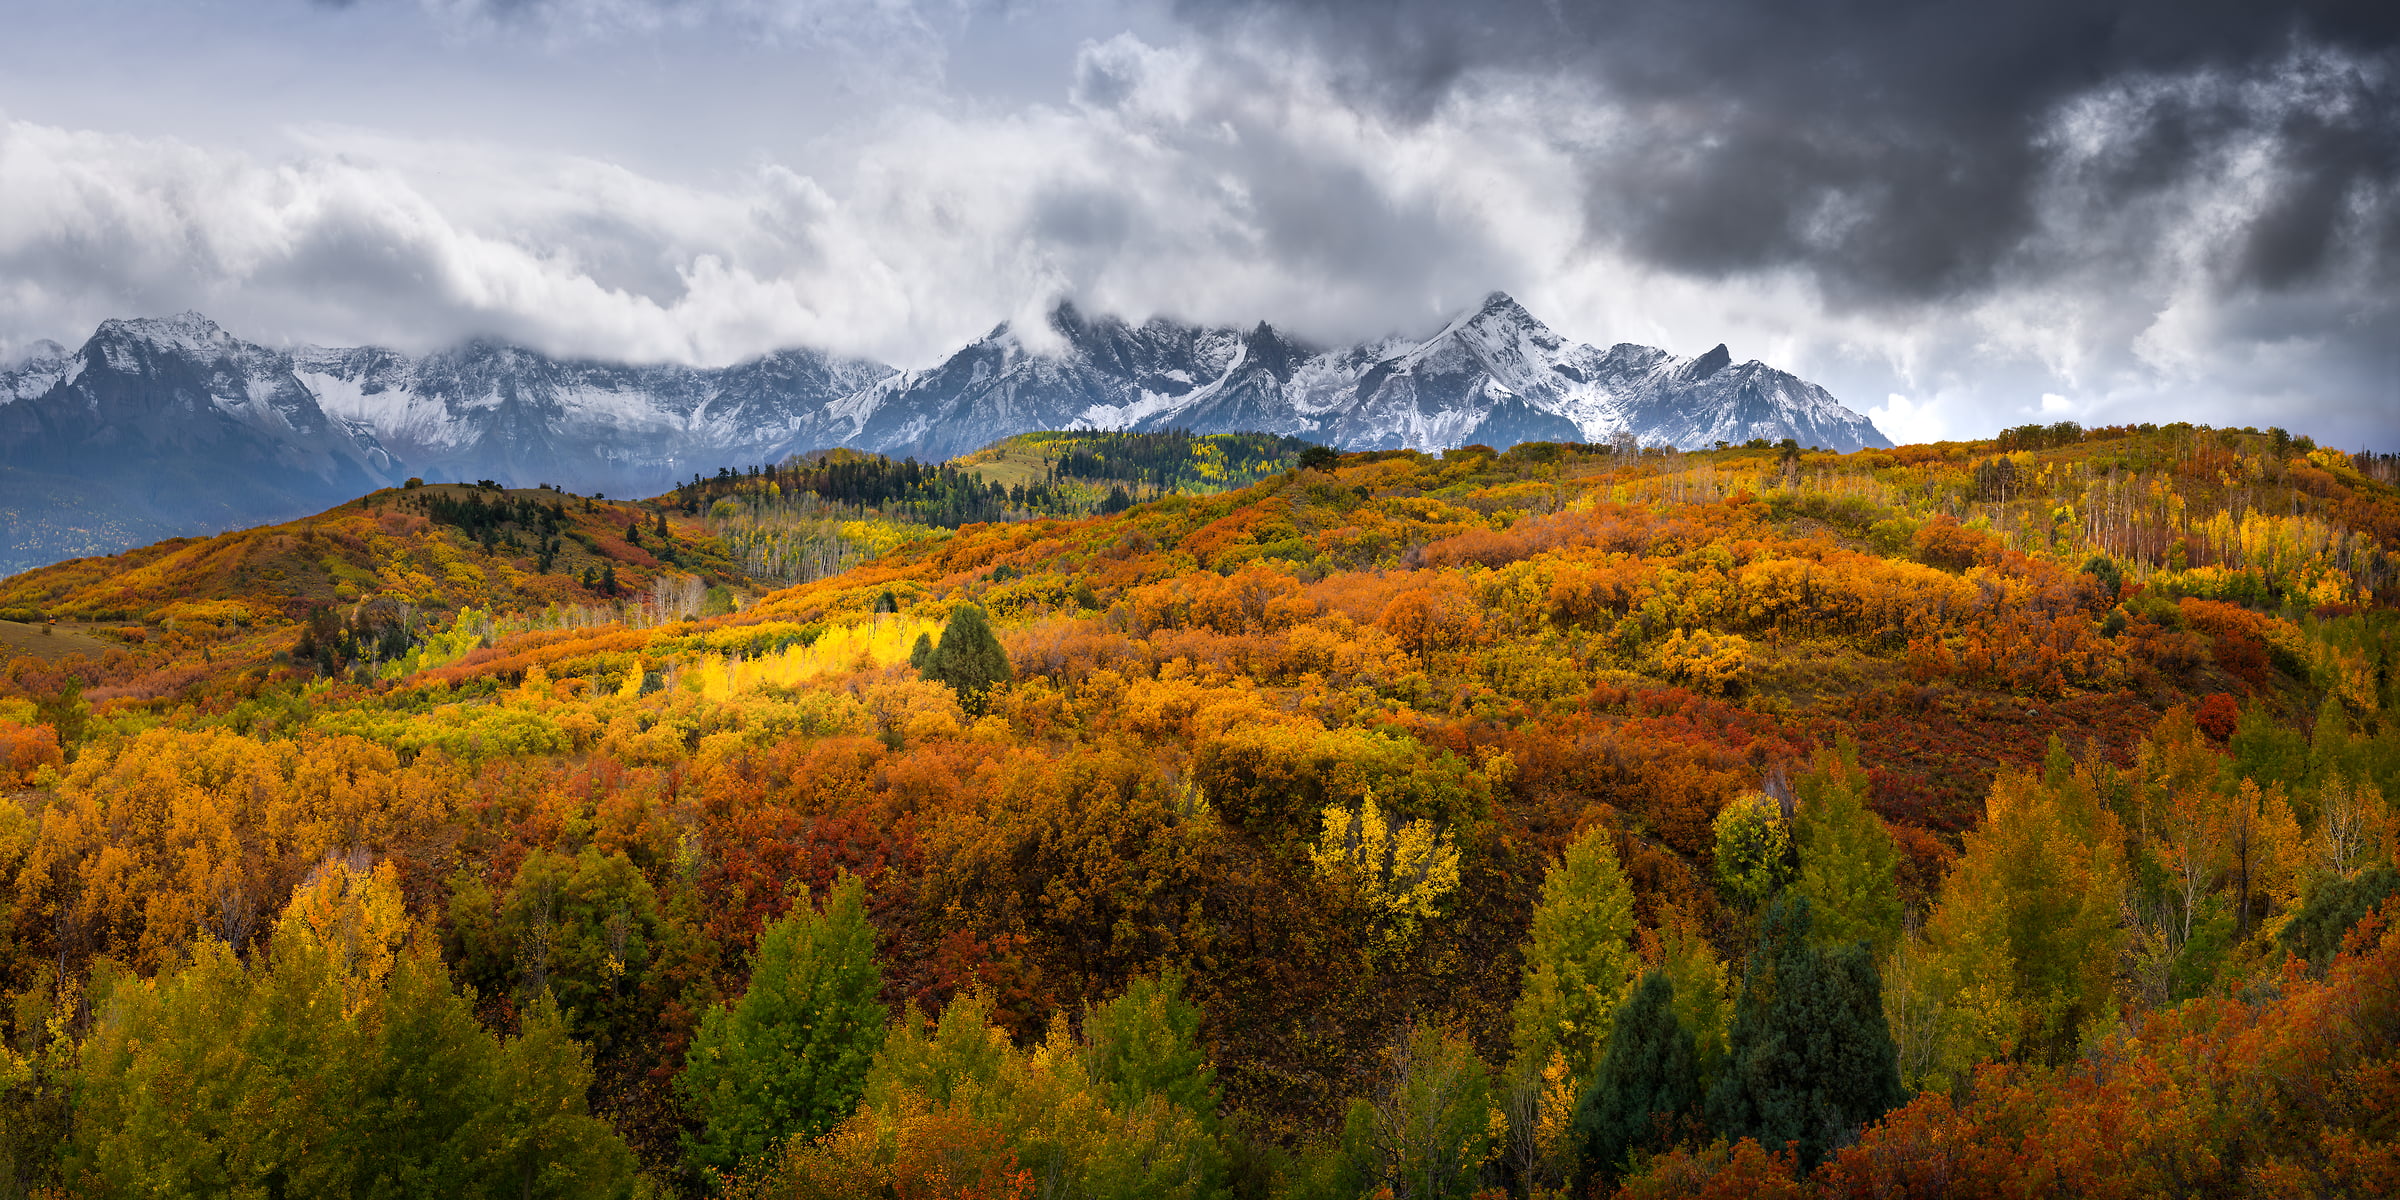 511 megapixels! A very high resolution, large-format VAST photo print of autumn foliage and mountains; landscape photograph created by Jeff Lewis in Ridgway, Colorado